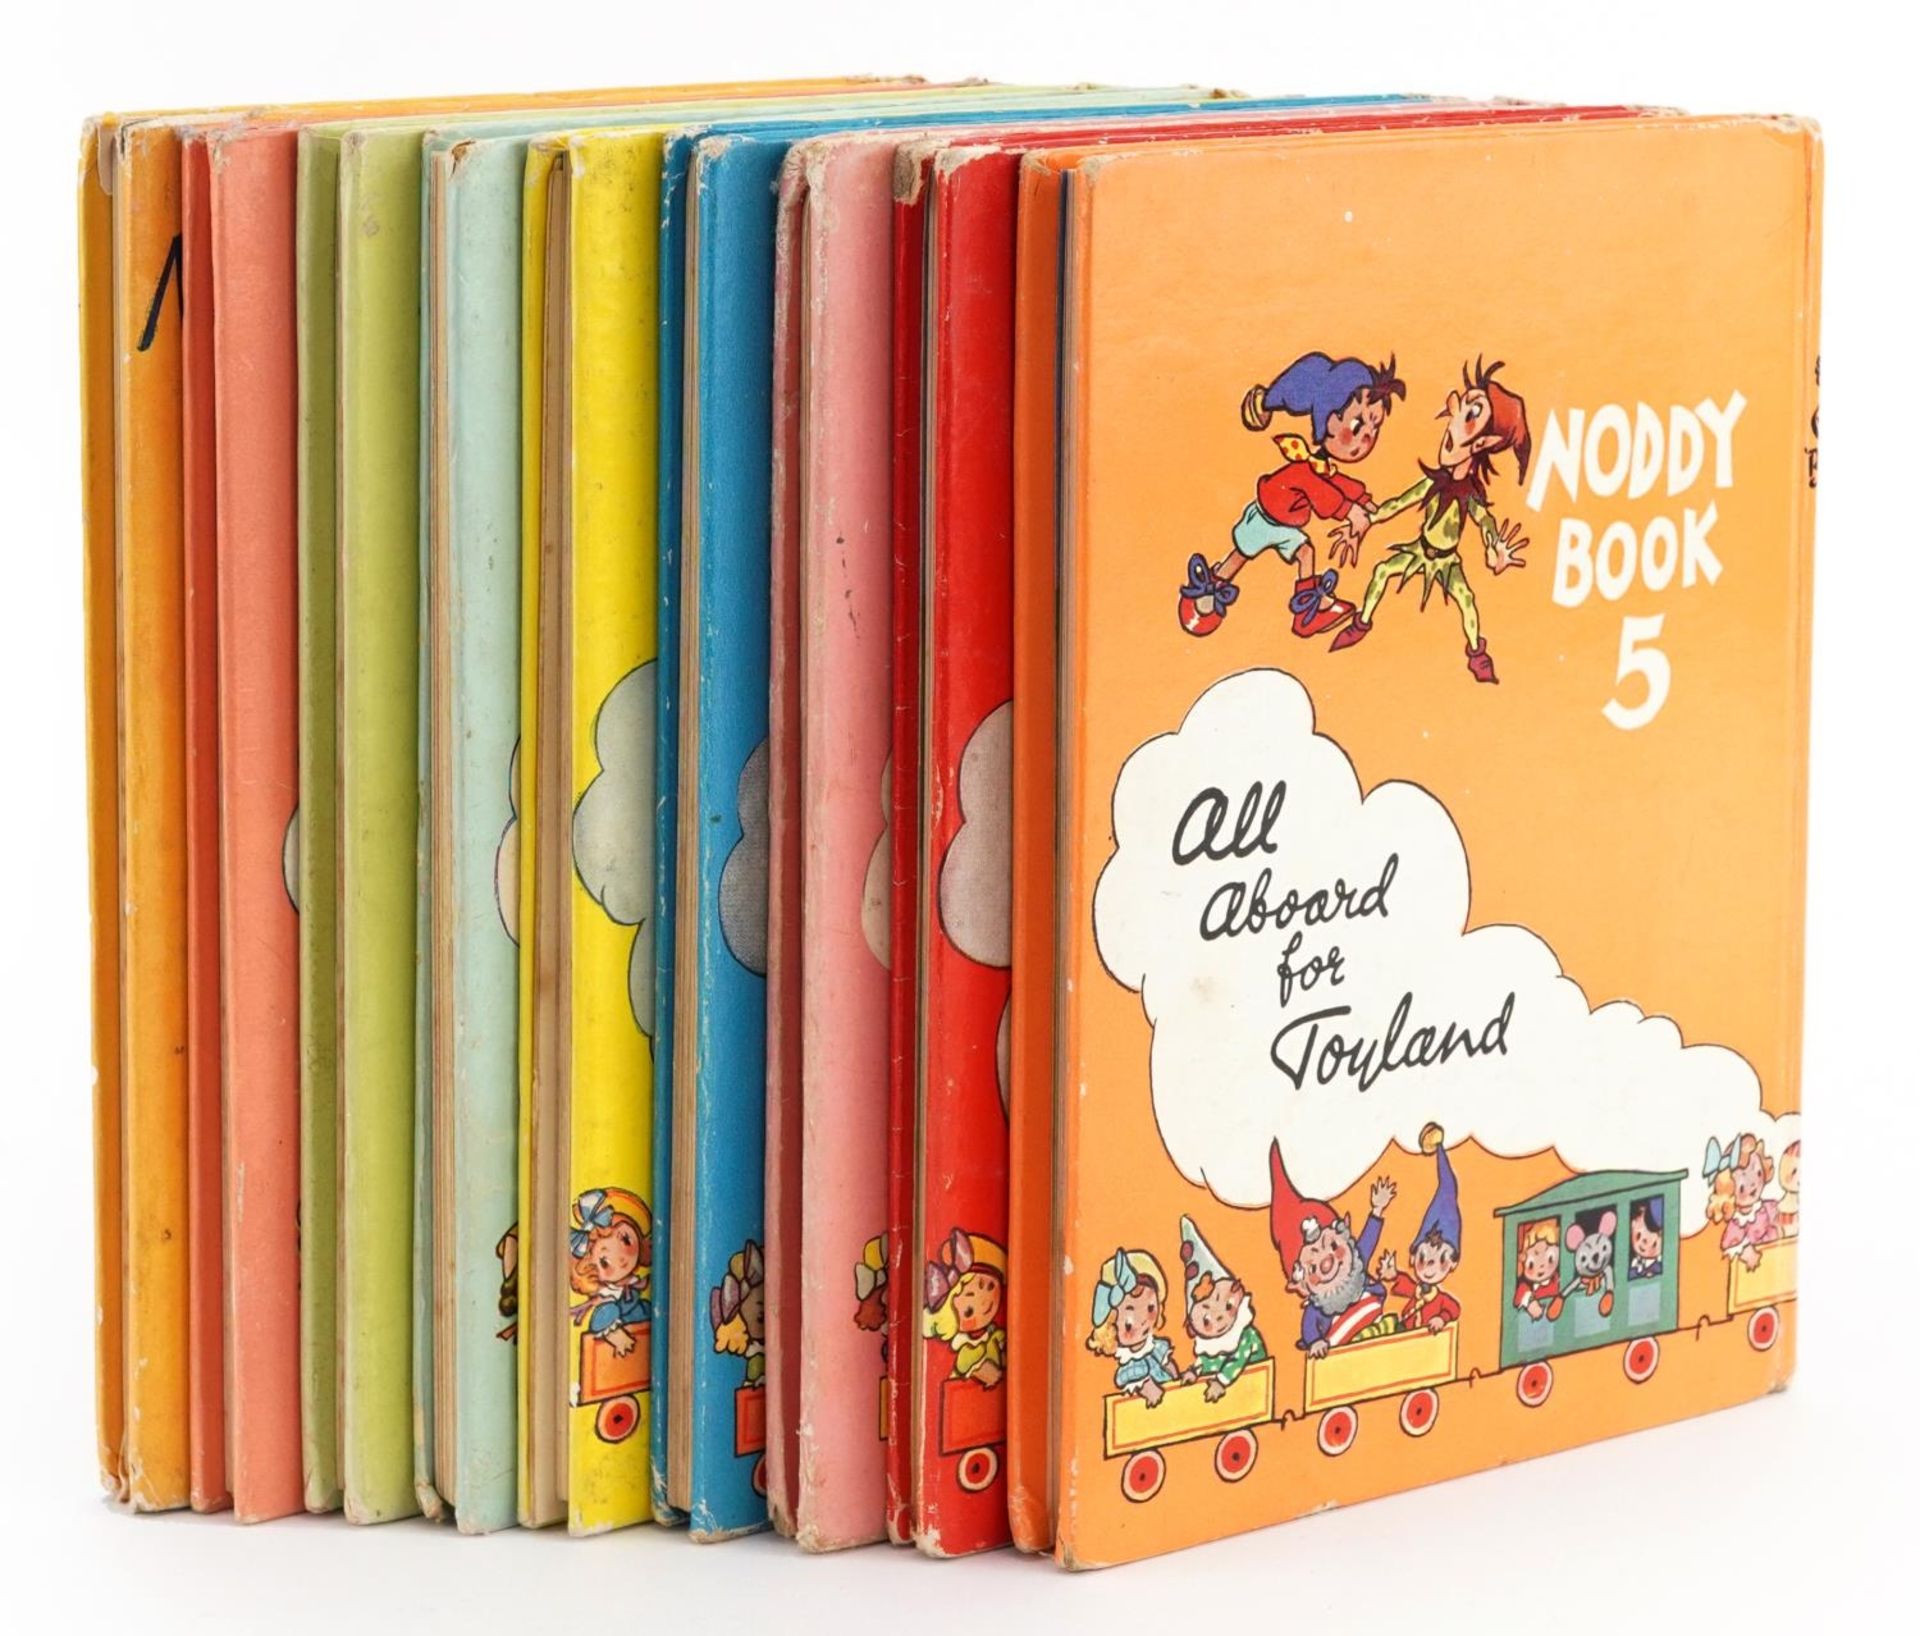 Nine Noddy hardback books by Enid Blyton including Noddy Meets Father Christmas : For further - Image 3 of 3